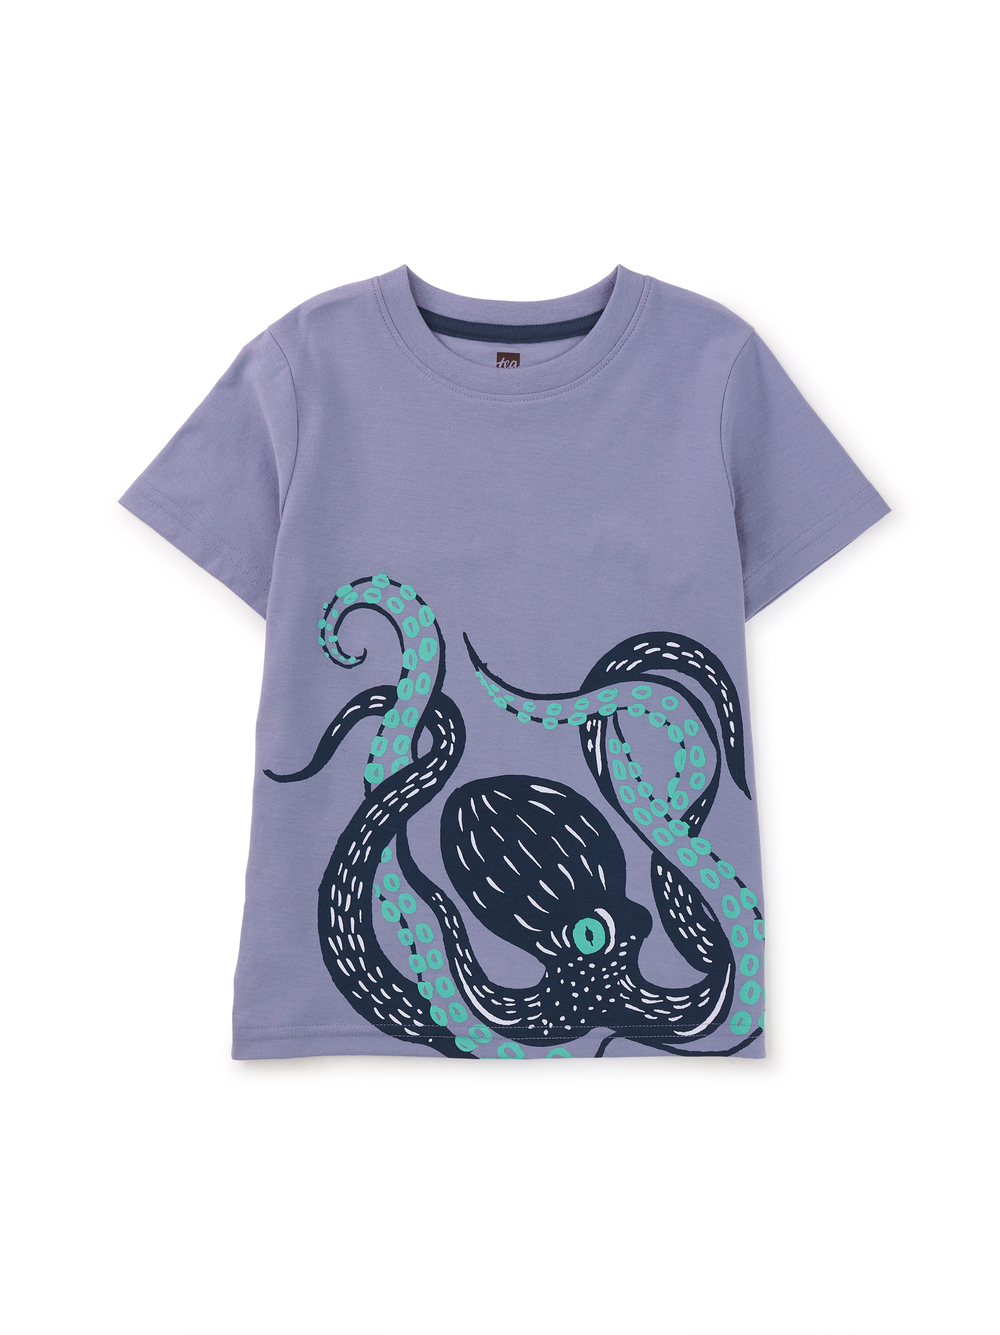 Octopus Arms Graphic Tee